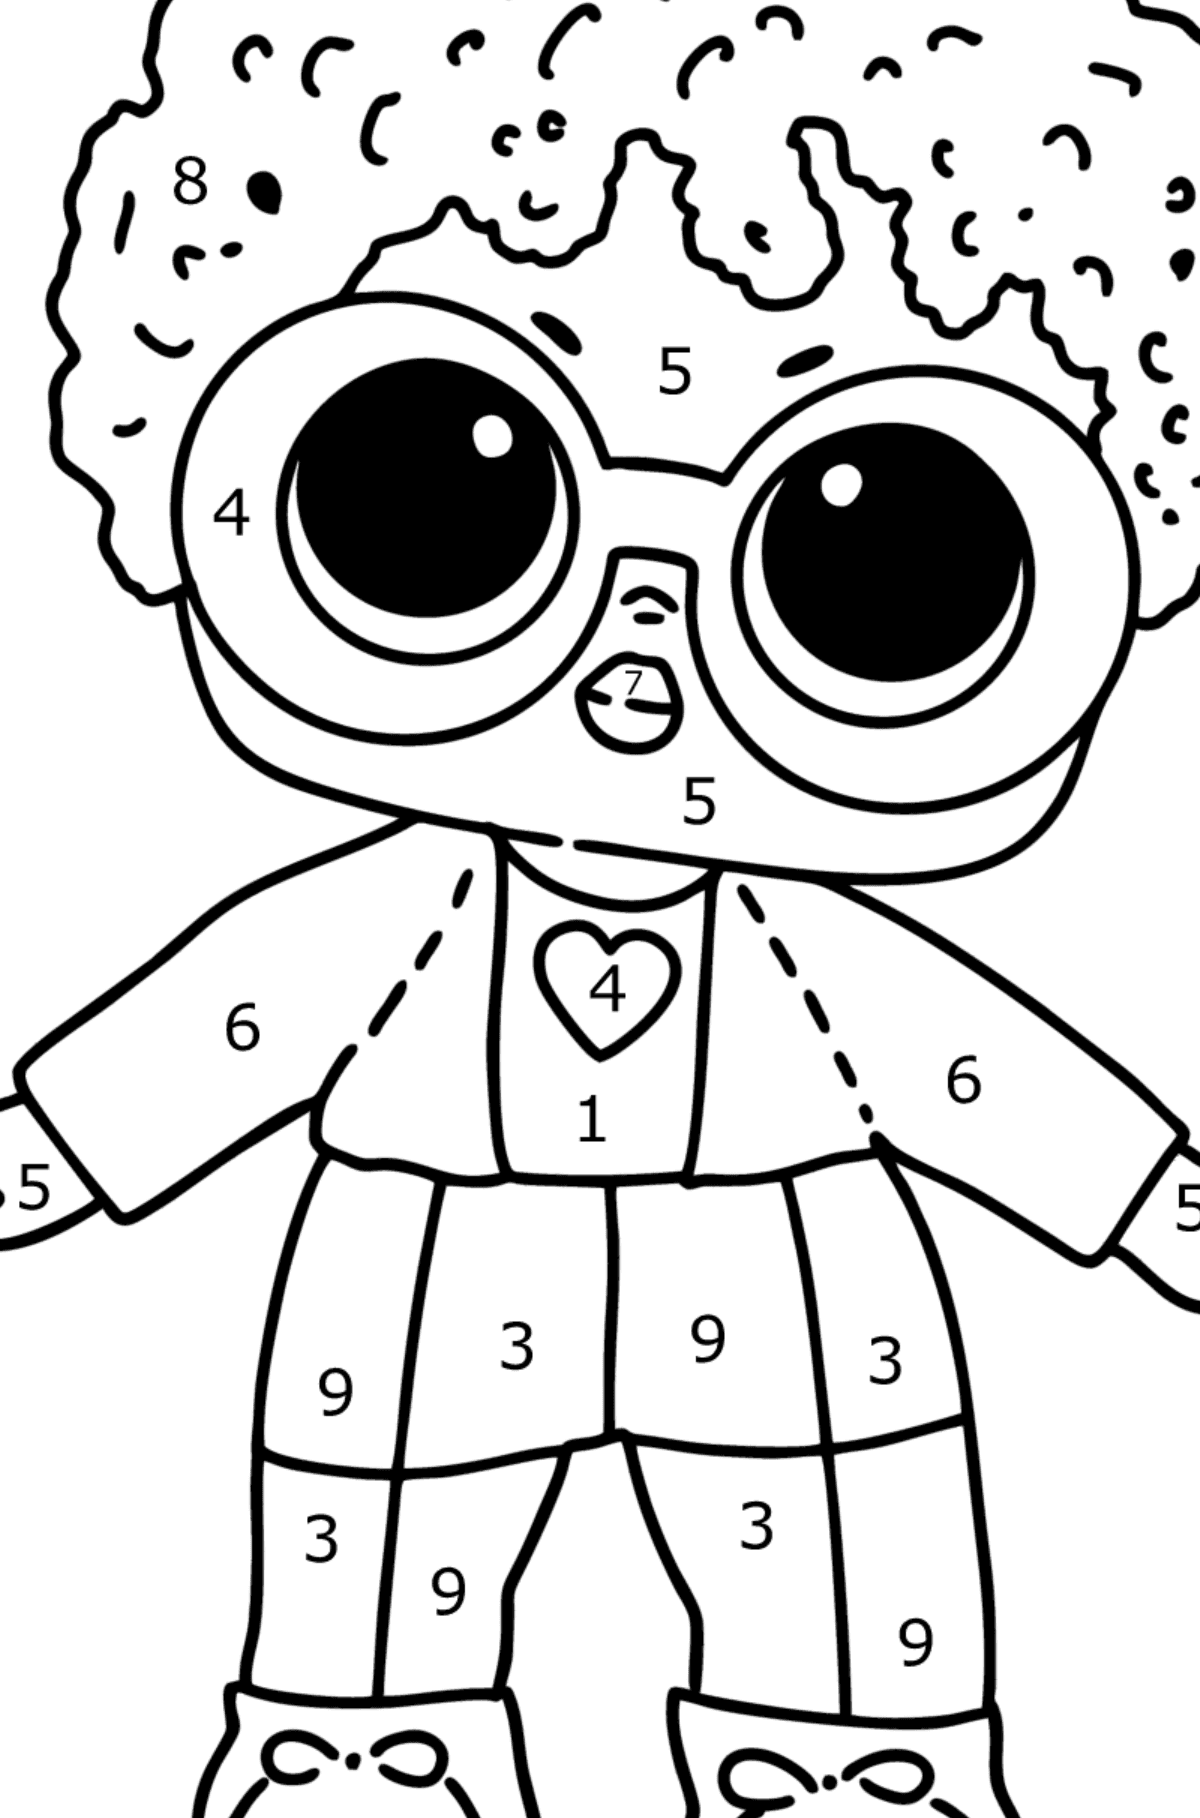 LOL Surprise Steezy Doll Boy coloring page - Coloring by Numbers for Kids